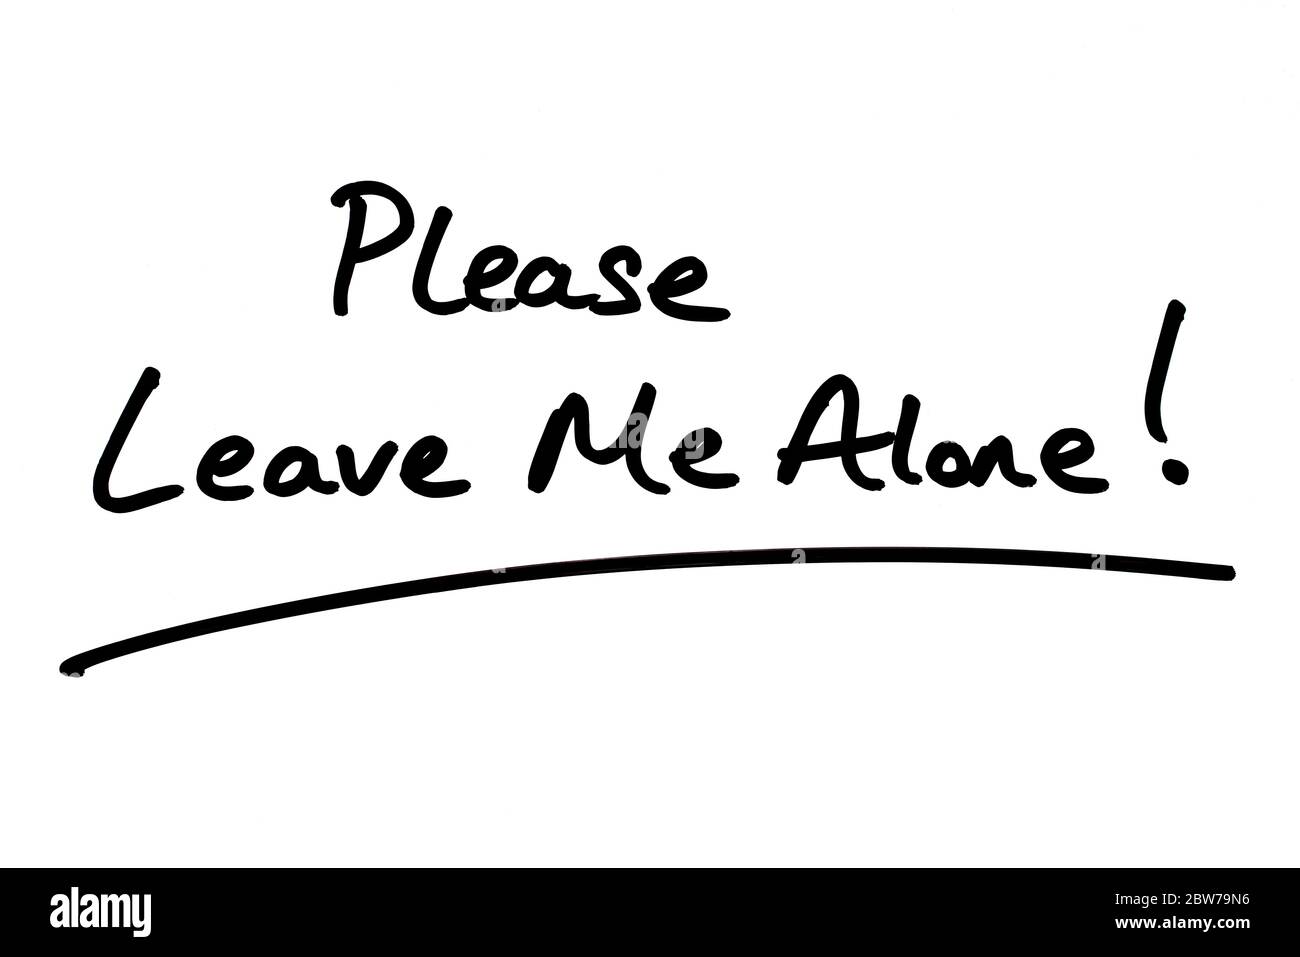 Please Leave Me Alone! handwritten on a white background Stock Photo - Alamy